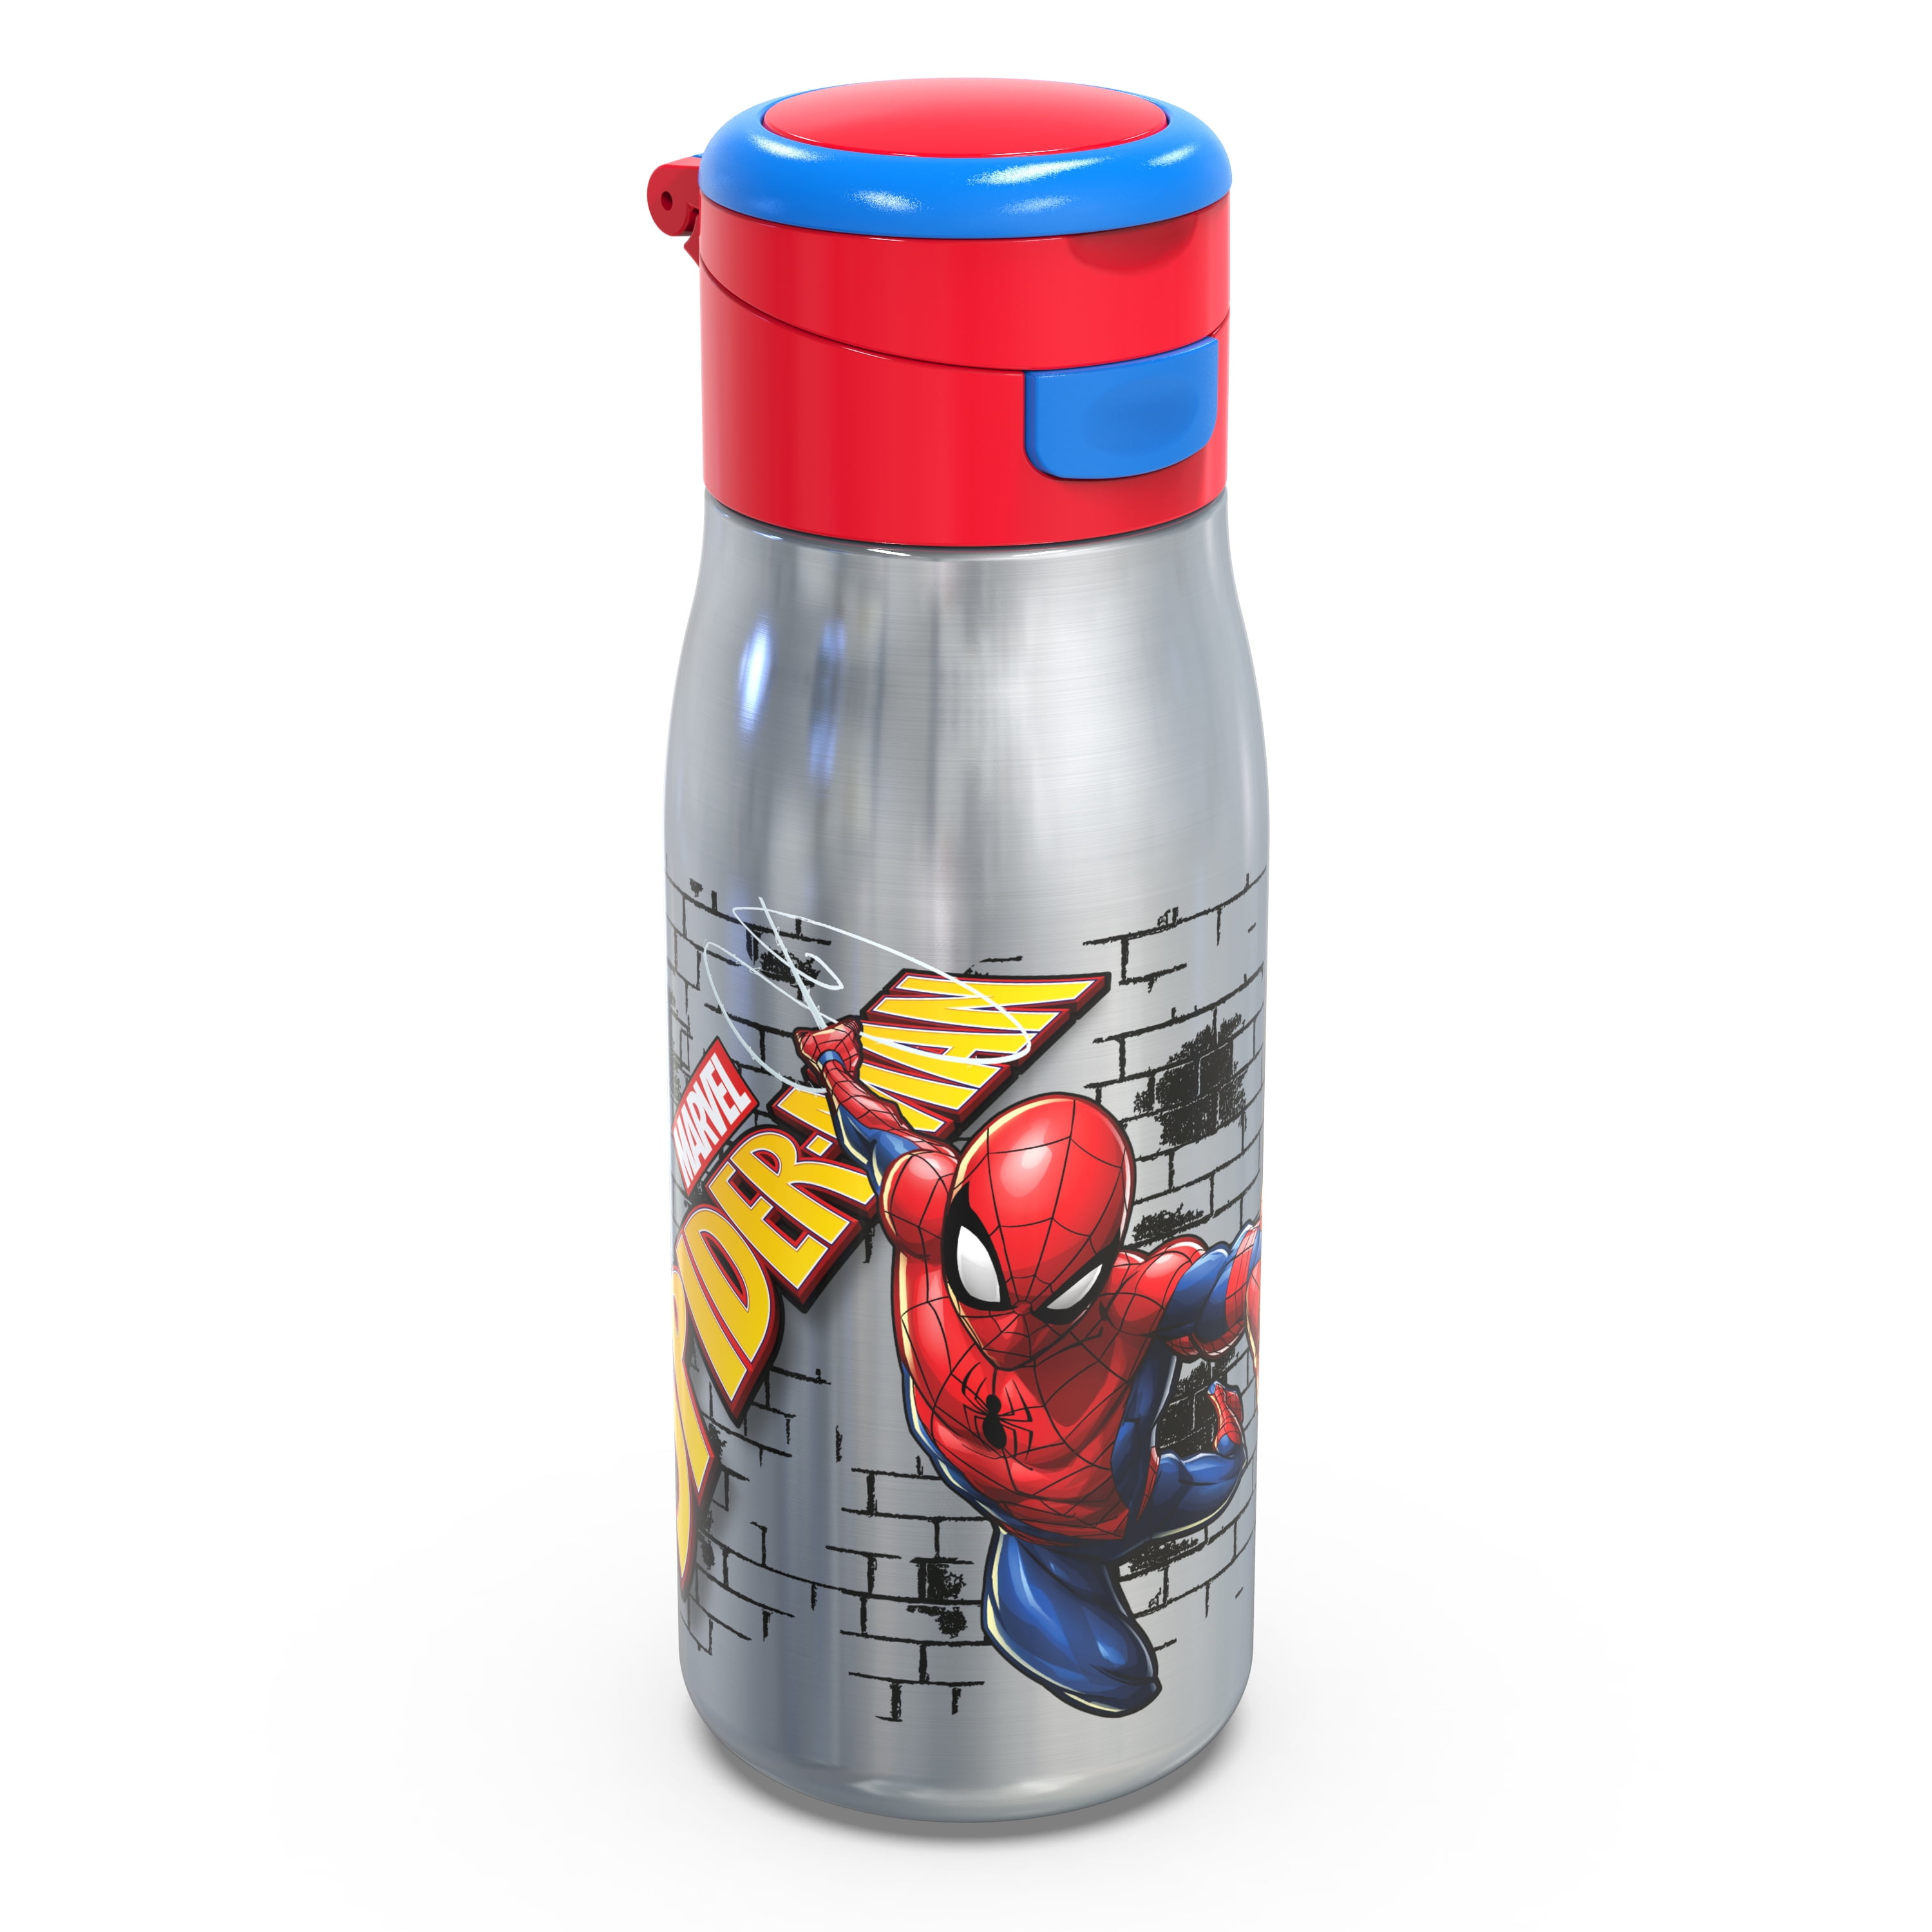 Zak Designs Marvel Comics 13.5 Ounce Stainless Steel Insulated